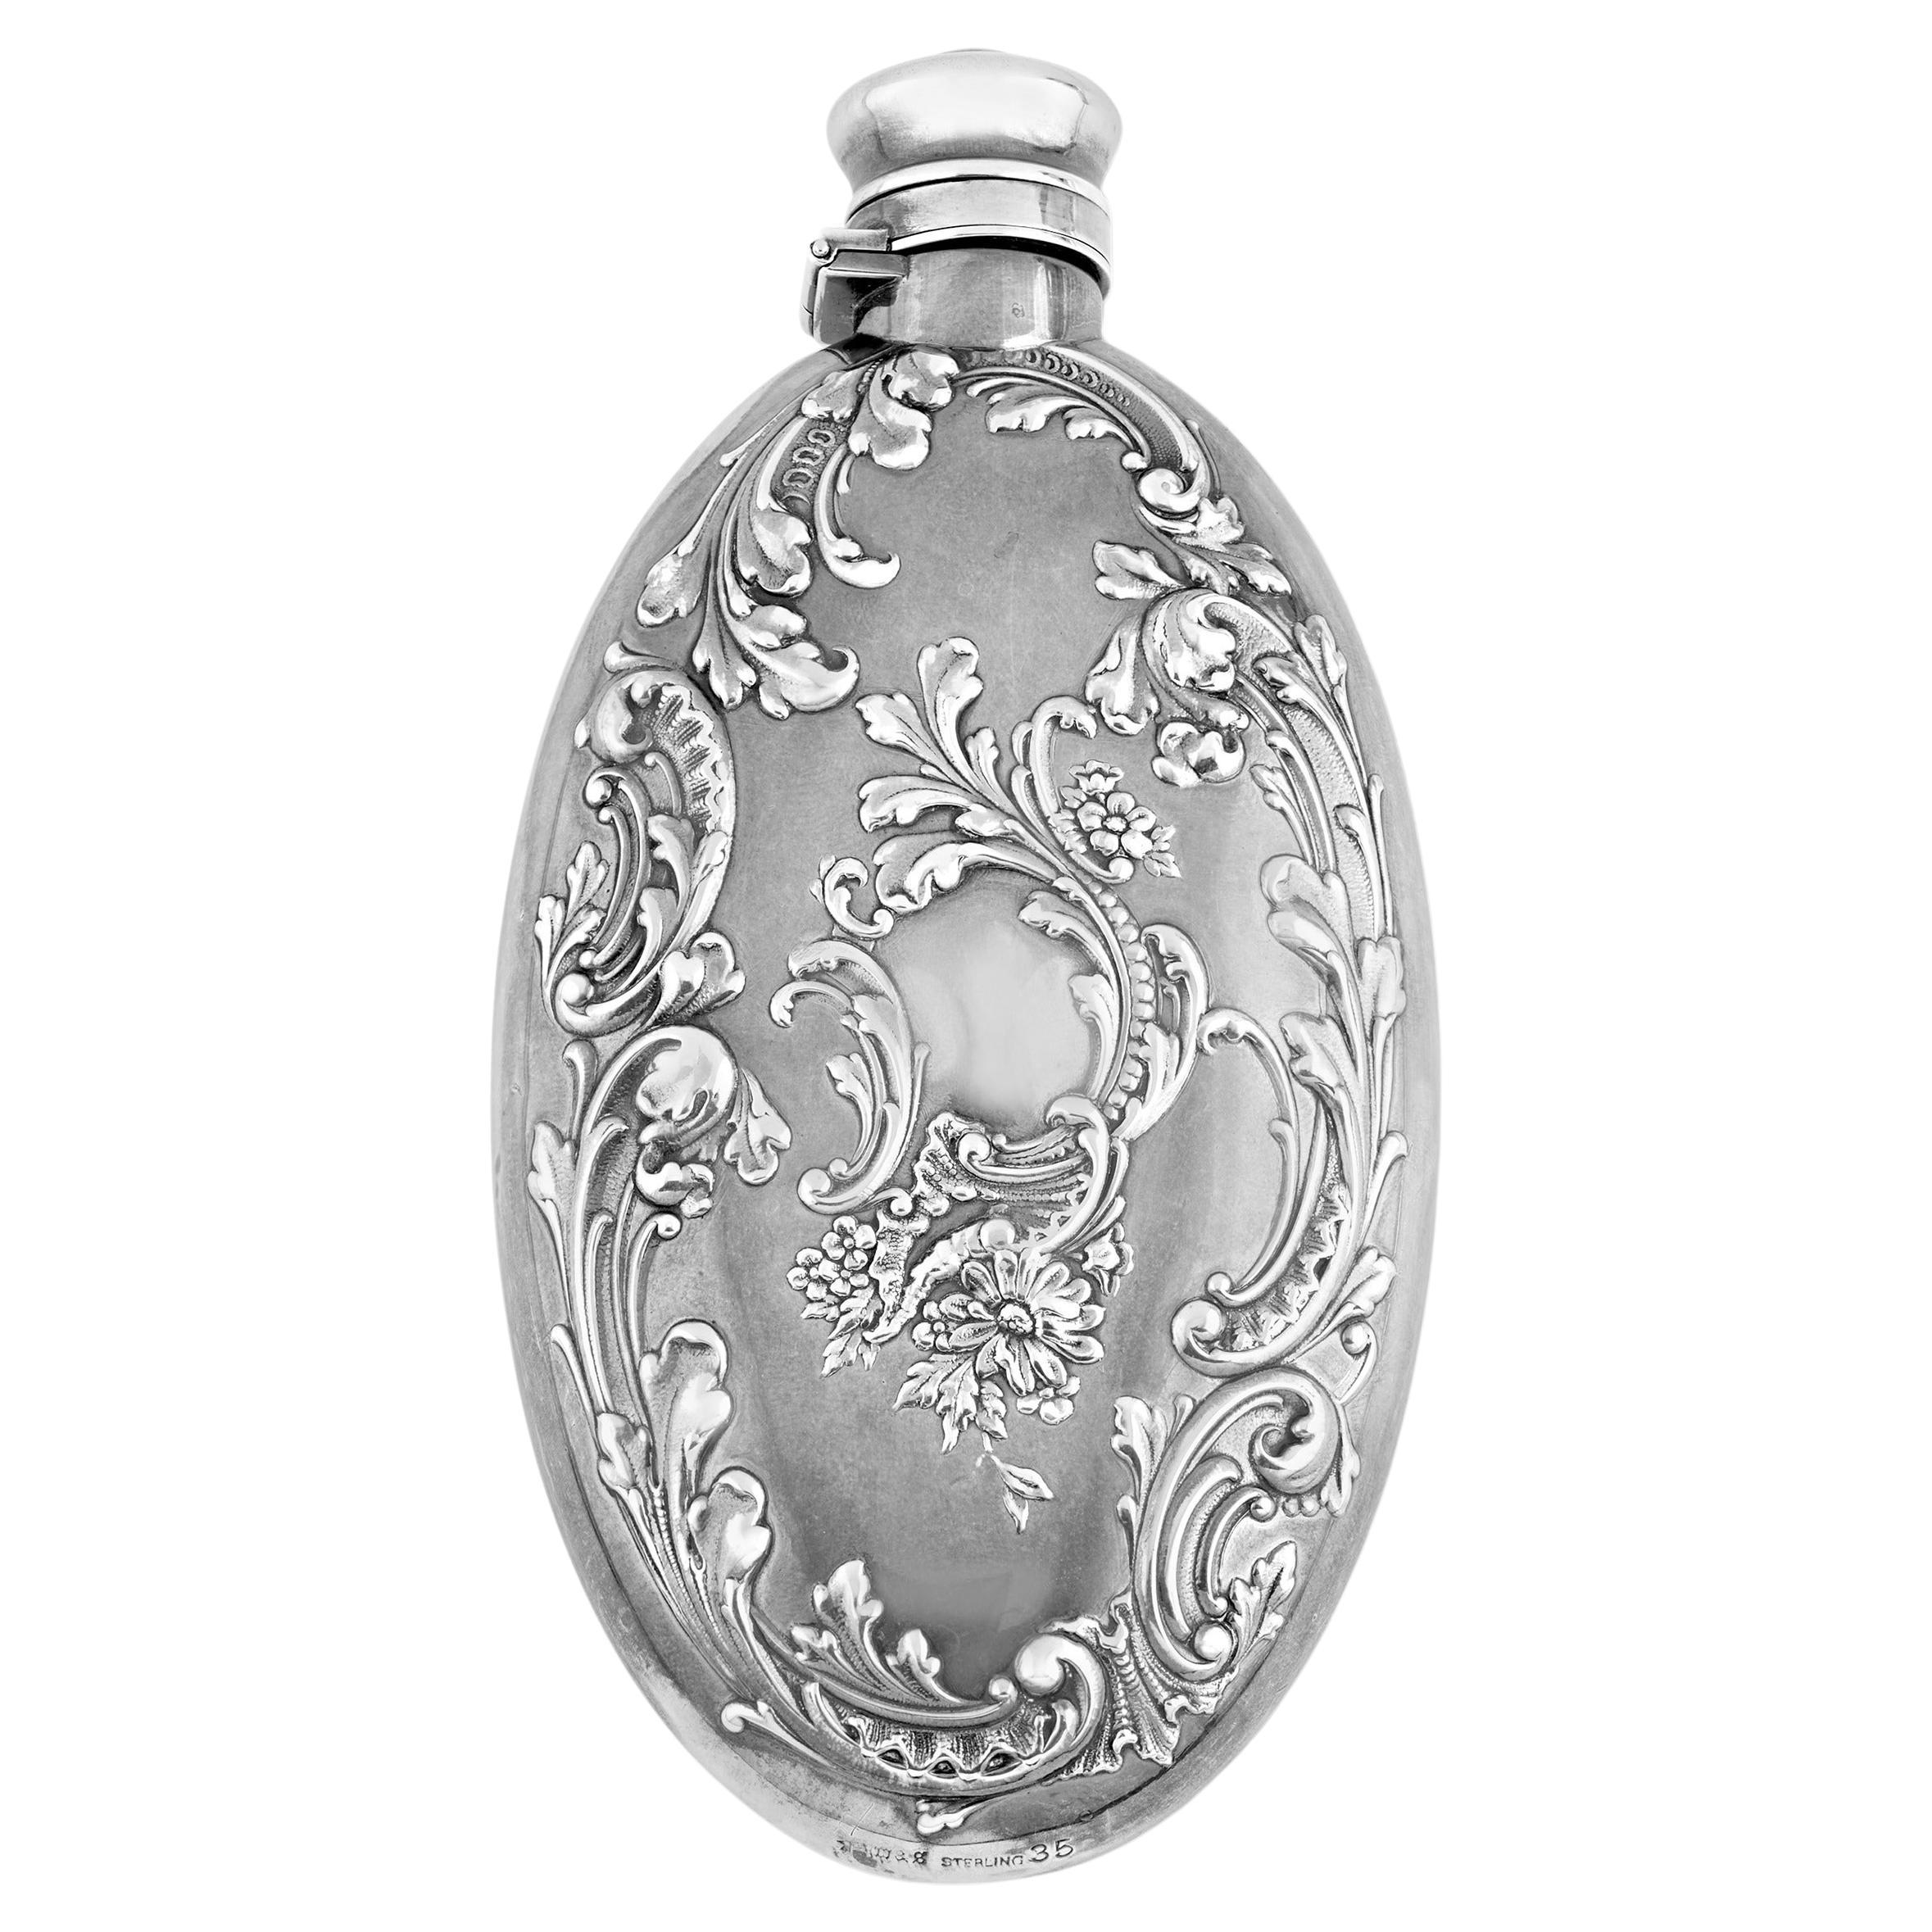 Silver Flask by R. Wallace & Sons